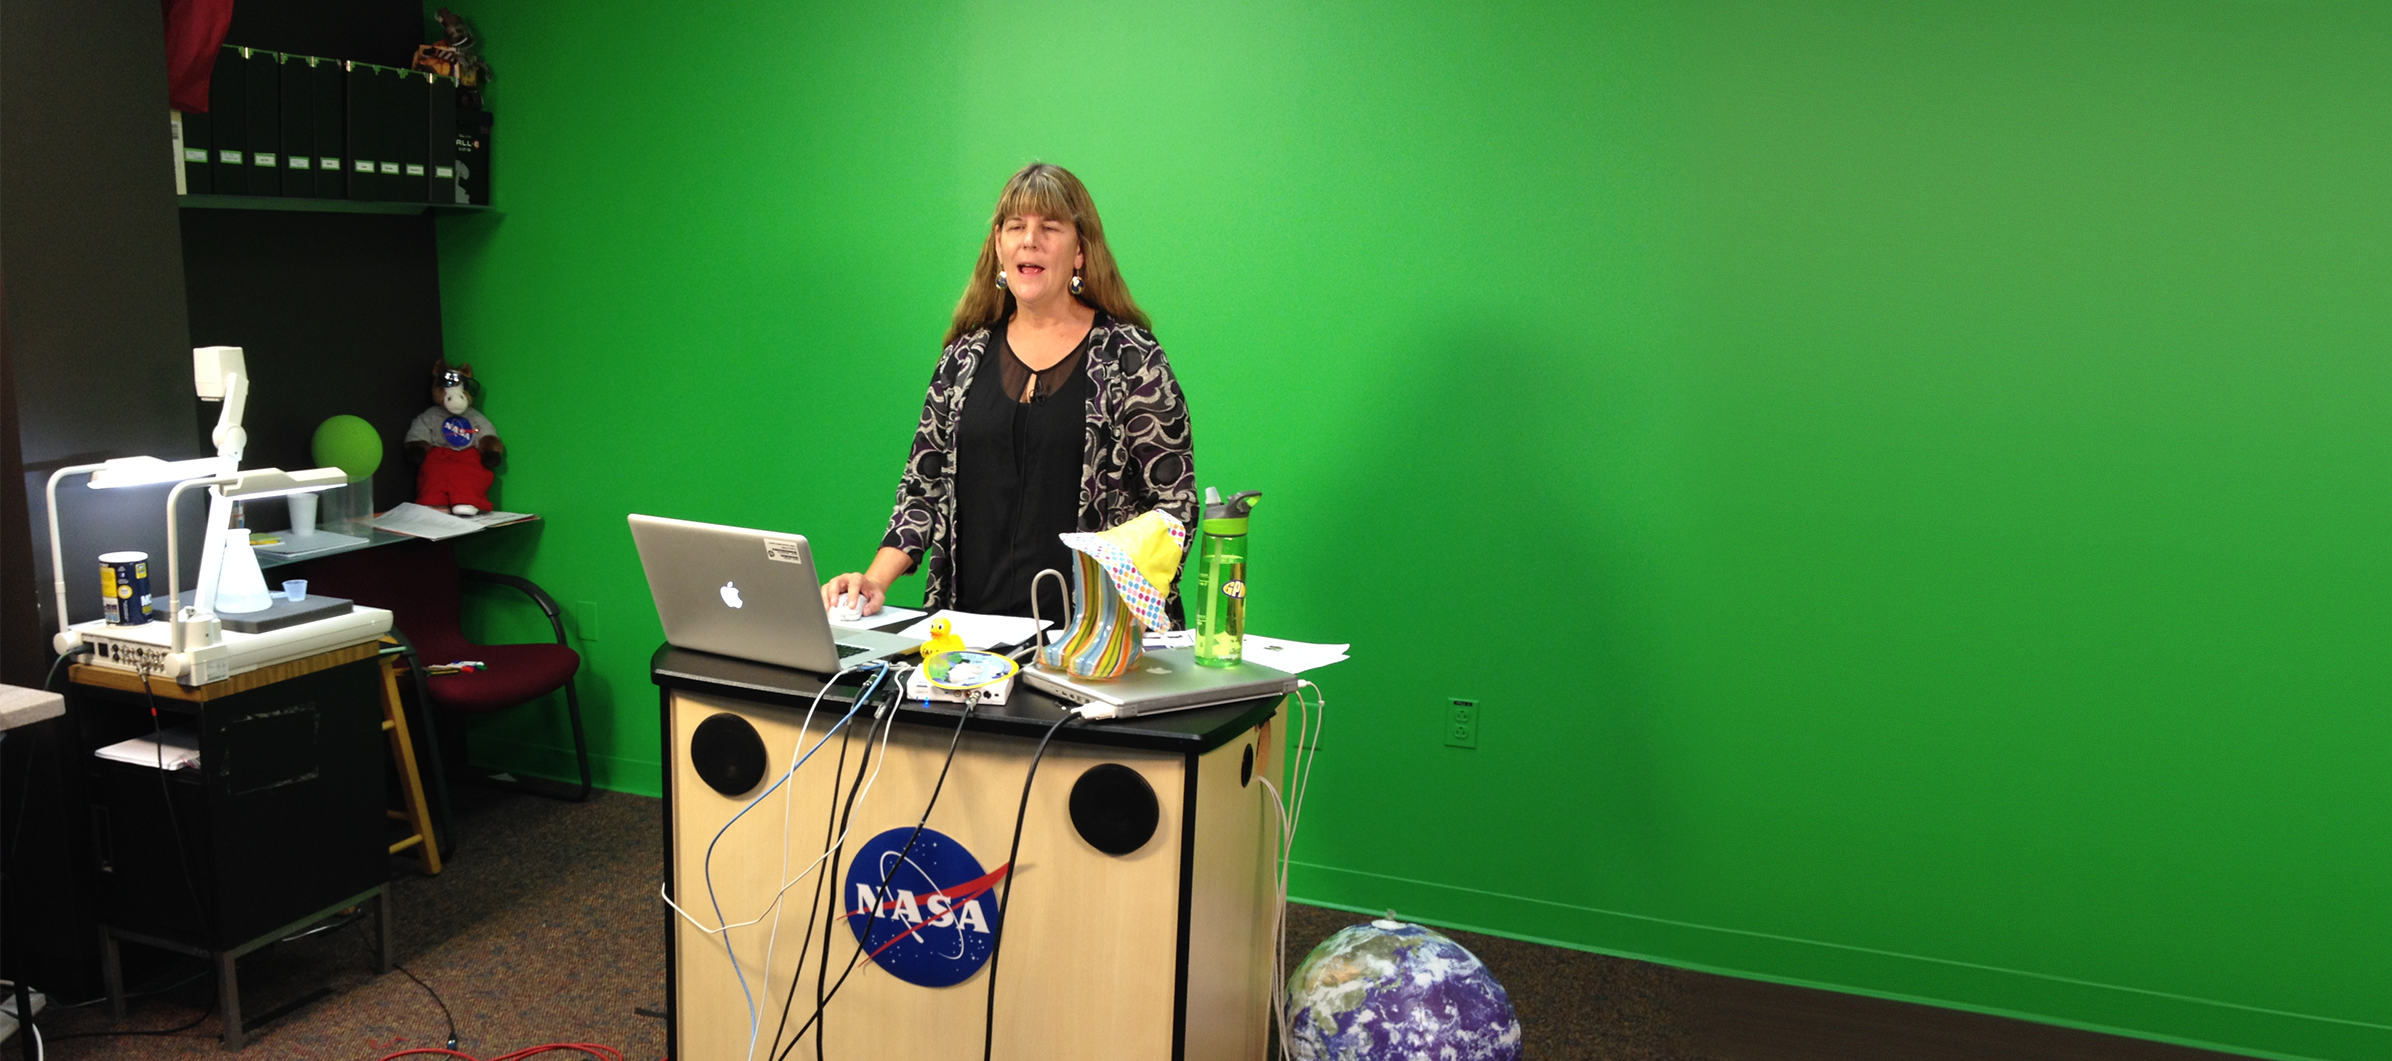 A woman stands giving a presentation at a desk in a studio, in front of a green screen wall.